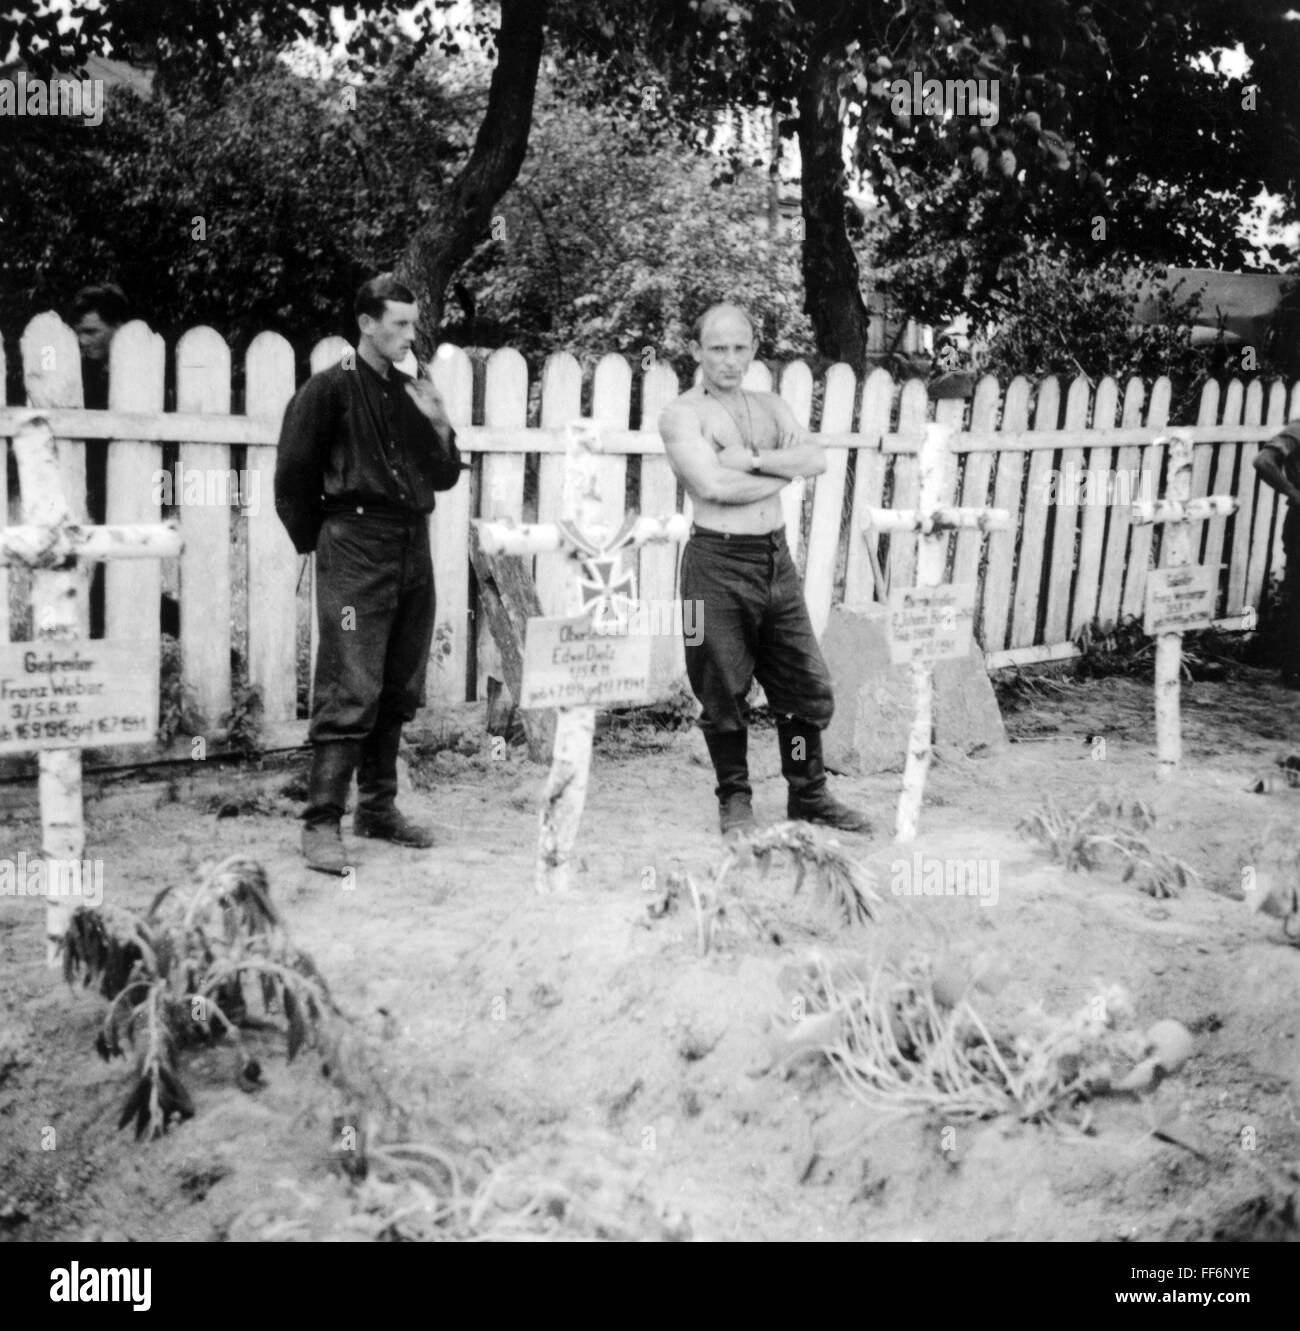 events, Second World War / WWII, Soviet Union, graves of members of the German 9th Panzer Division, 1st Panzer Army, Army Group South, in the Ukraine, summer 1941, photo taken by a member of the German Reich Labour Service (Reichsarbeitsdienst, RAD), Additional-Rights-Clearences-Not Available Stock Photo